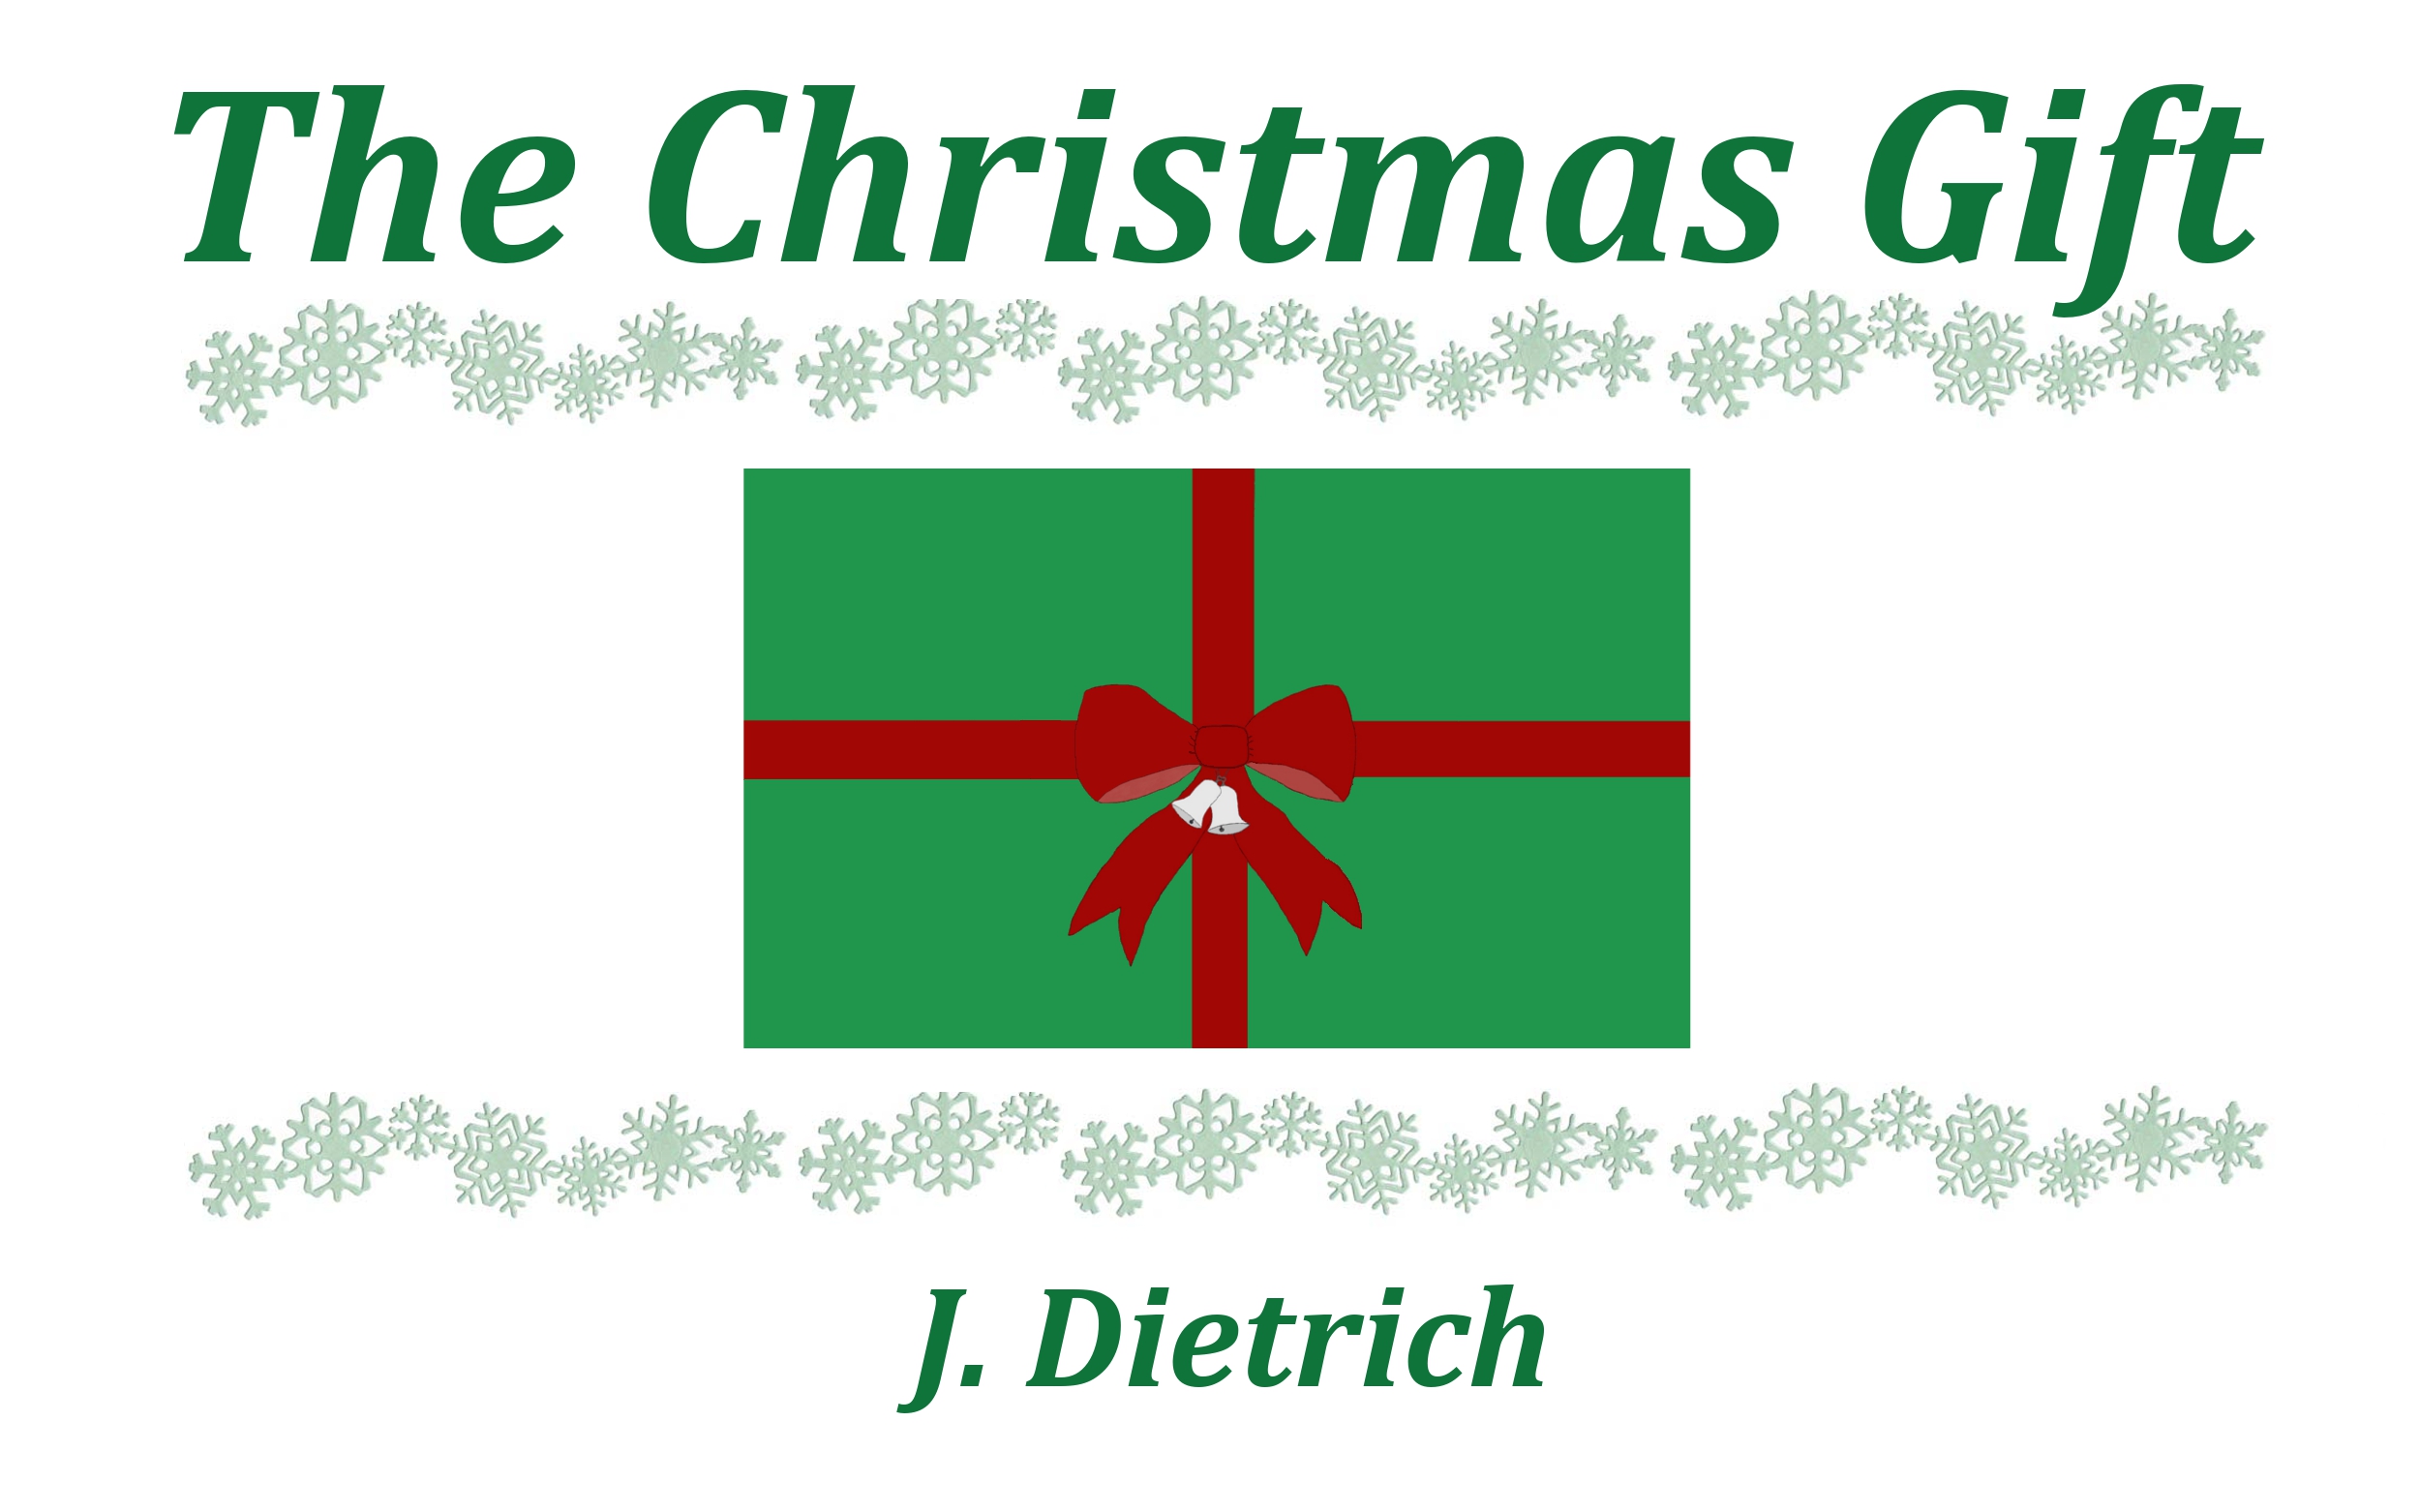 FREE: The Christmas Gift by J. Dietrich